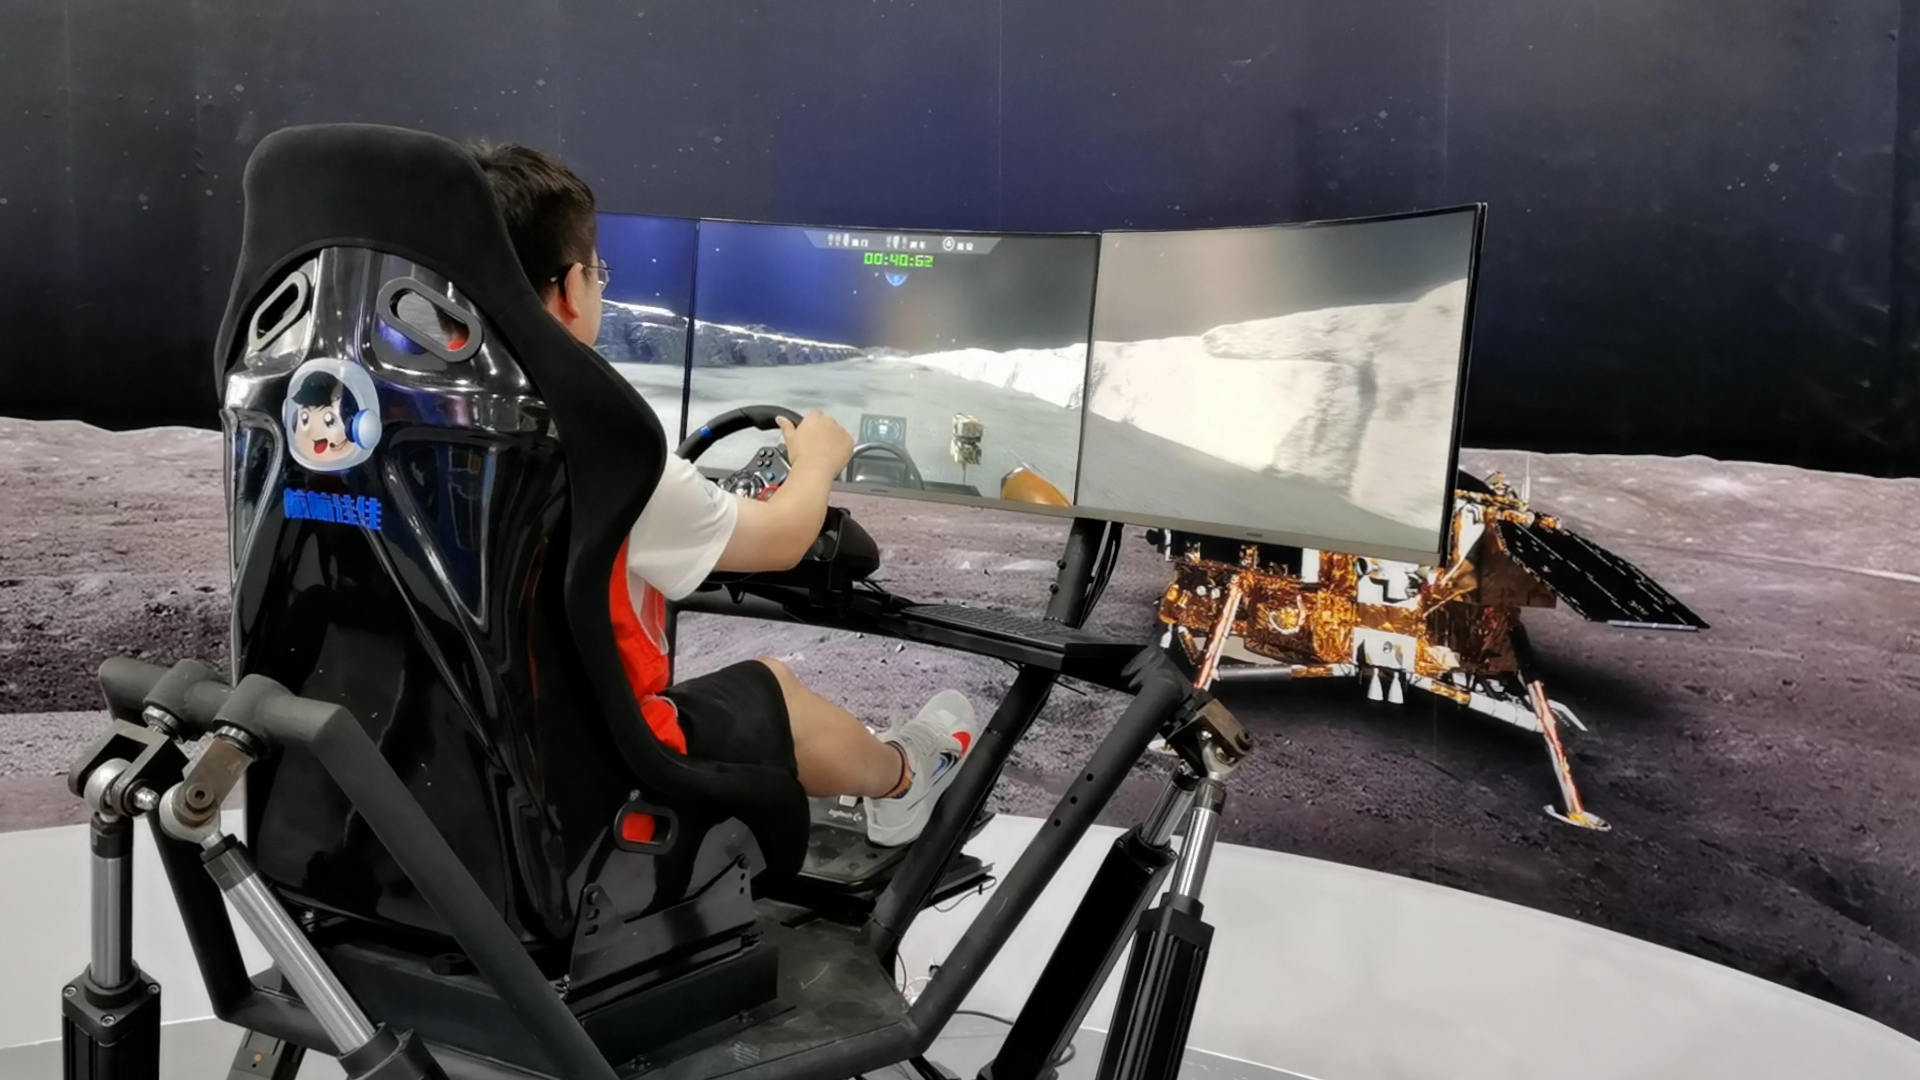 A visitor drives a lunar vehicle in a simulator, Beijing, China, September 15, 2023. /CGTN